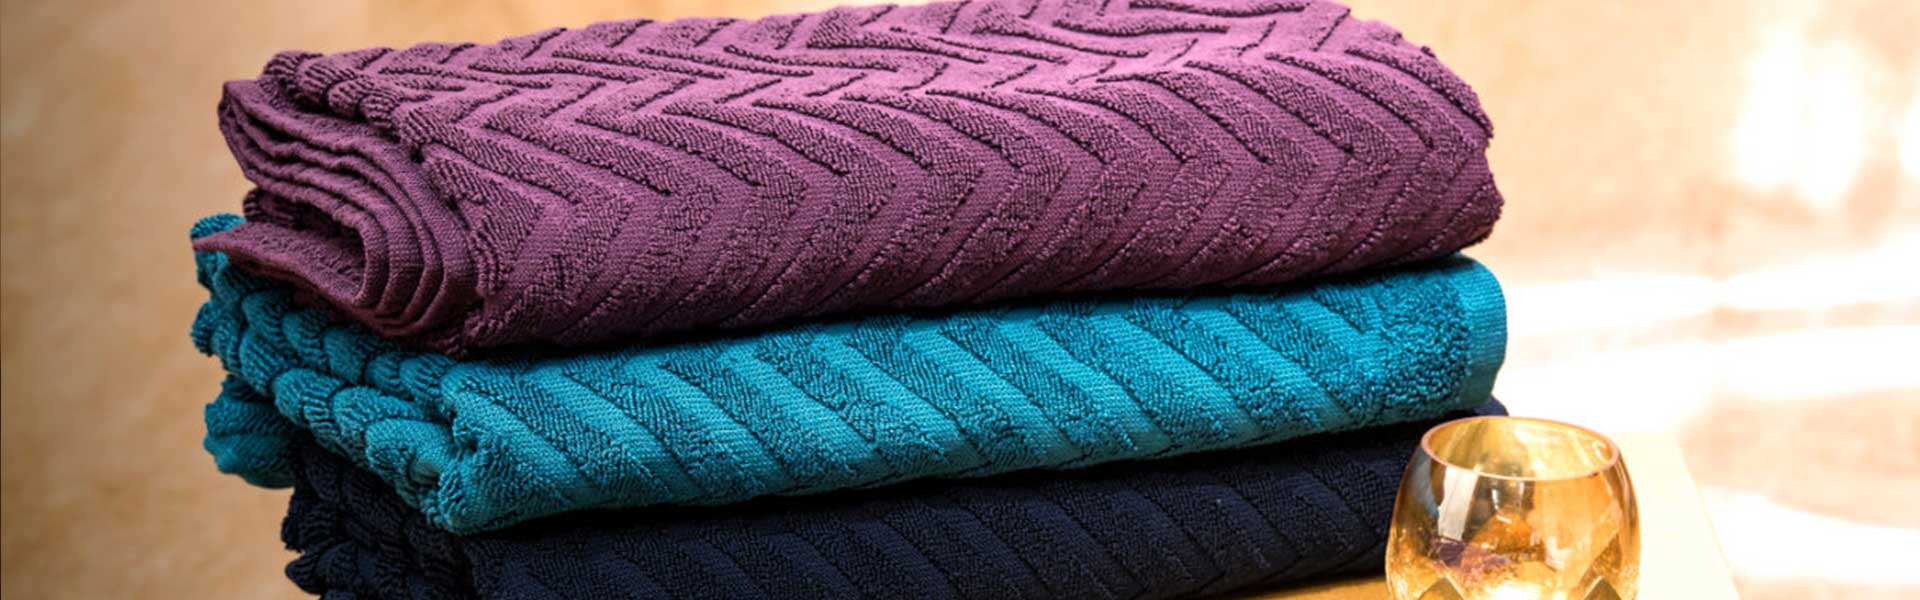 5 Best Fabrics For Towels (Most Absorbent Fabric For Towels)